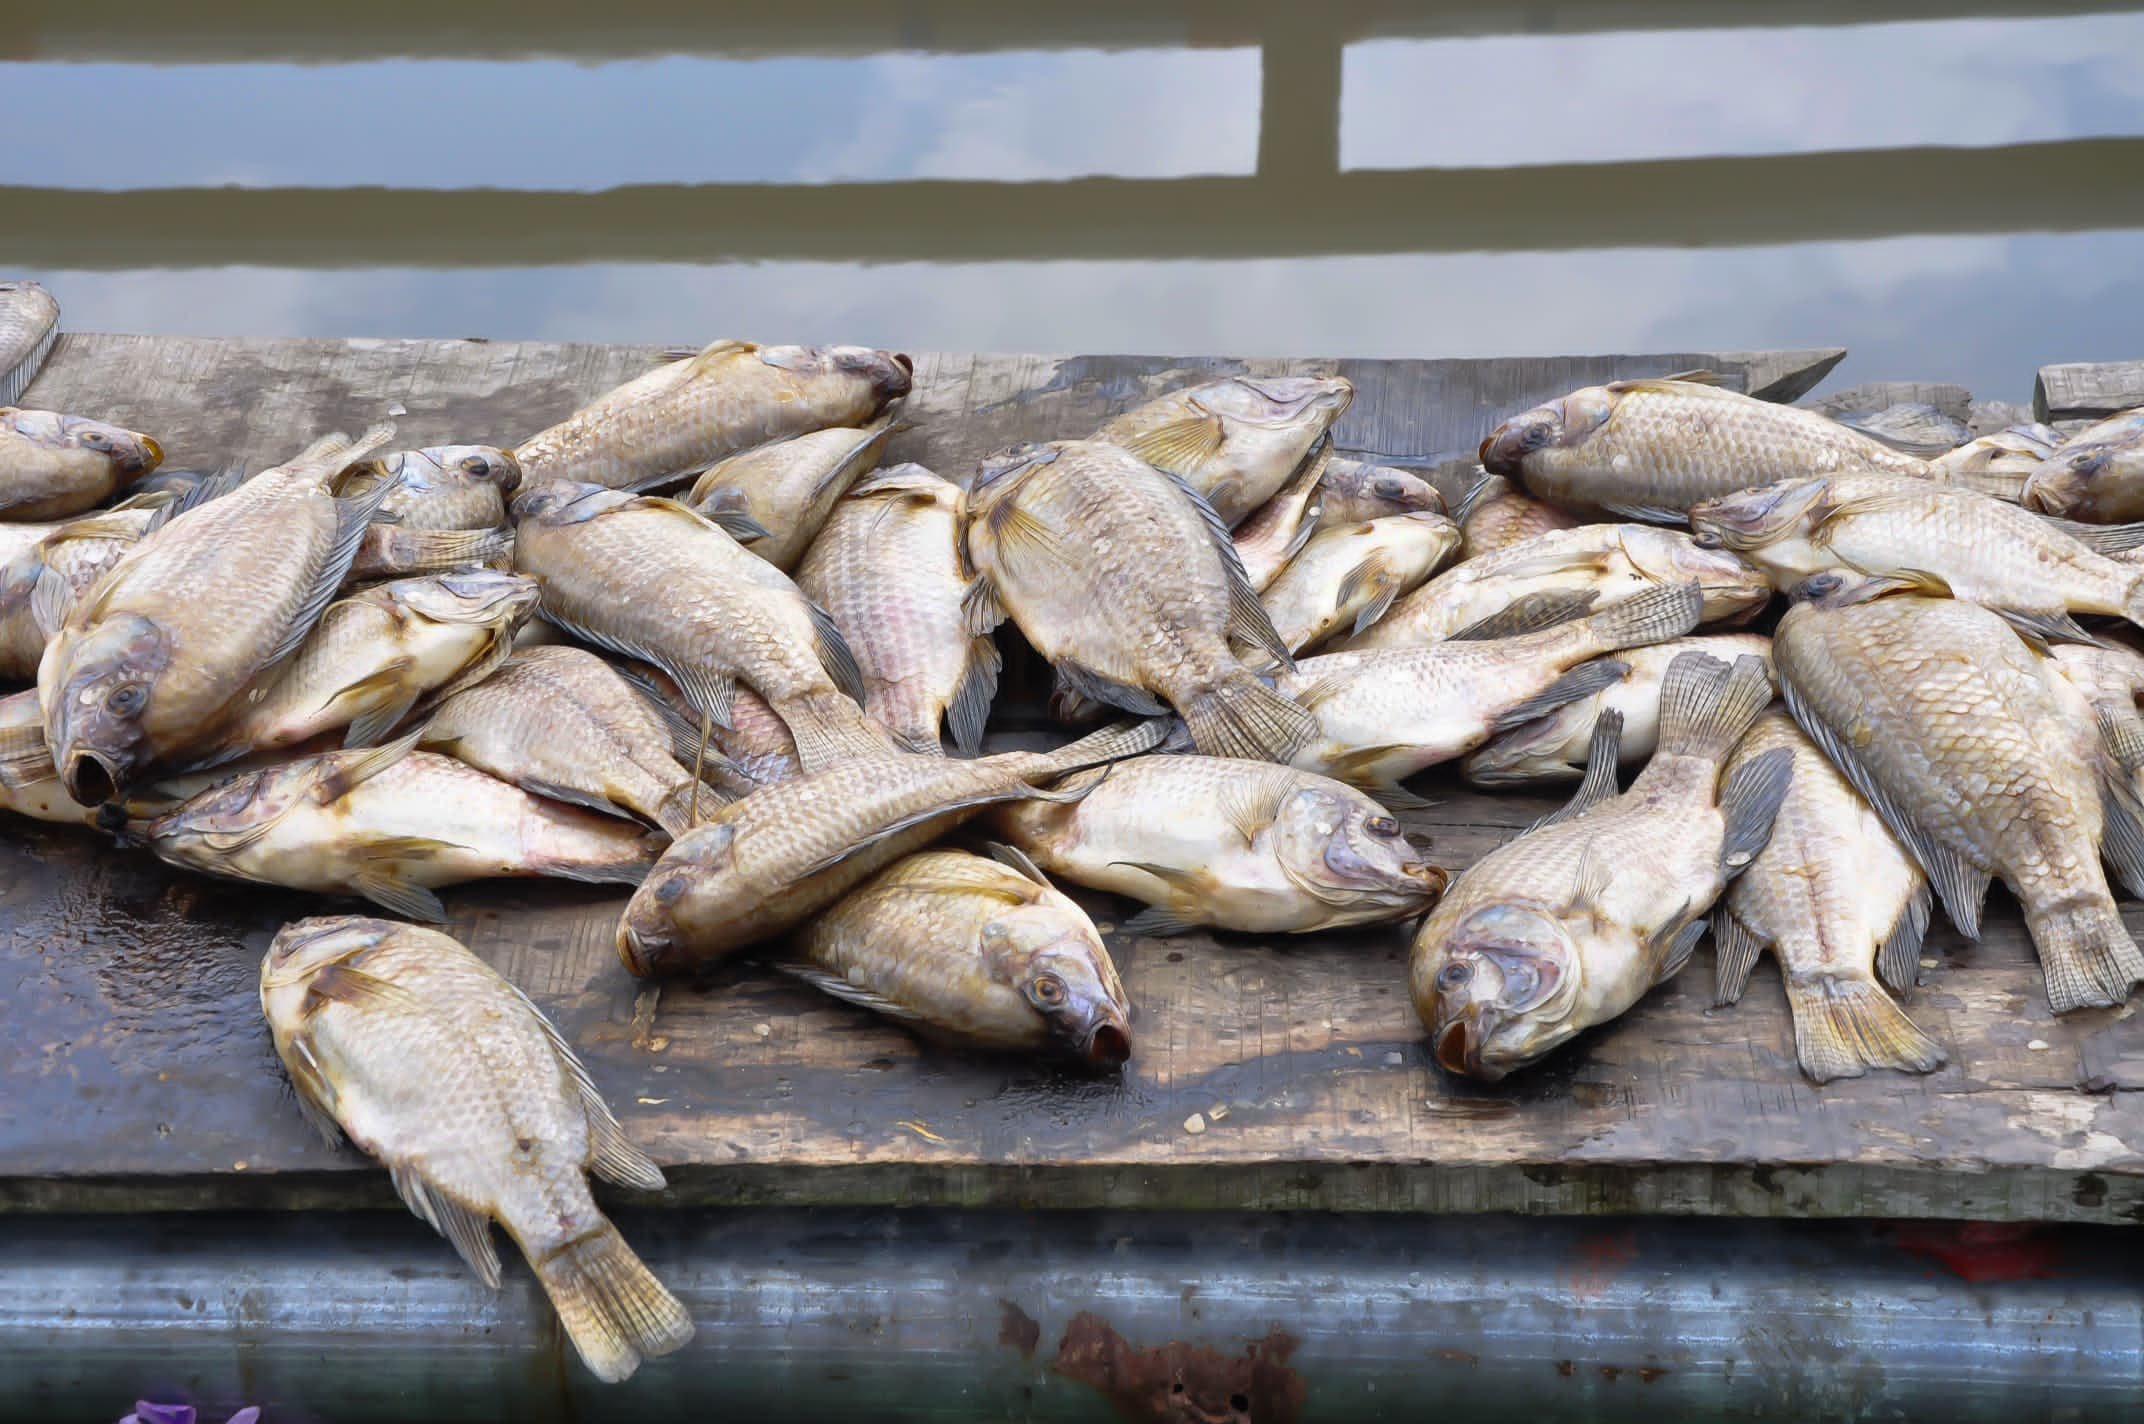 Samples of dead fish at the Cottage Fish Processing Center, Ebute Afuye Cluster, Epe, Lagos